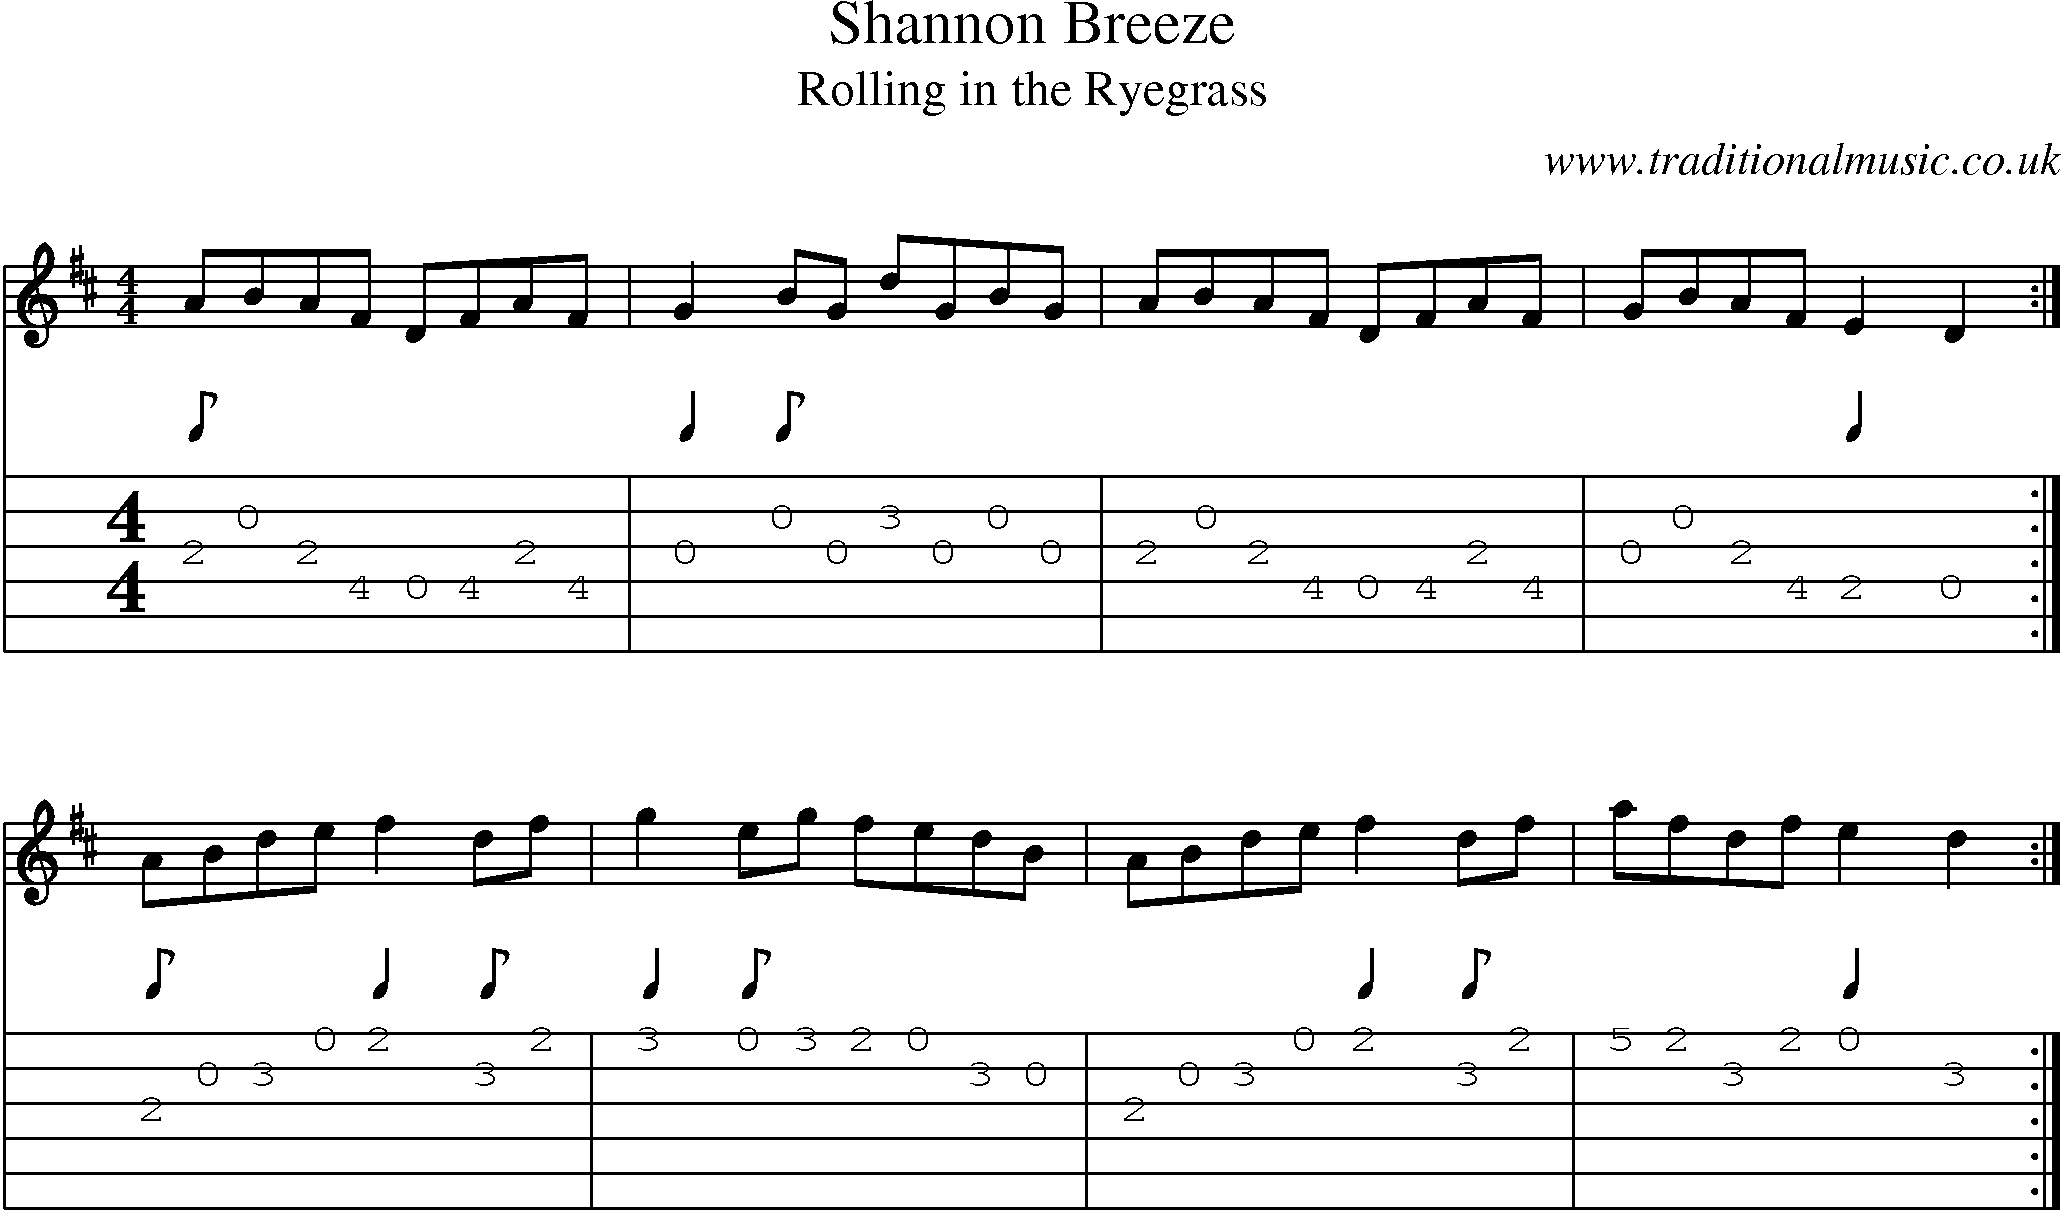 Music Score and Guitar Tabs for Shannon Breeze